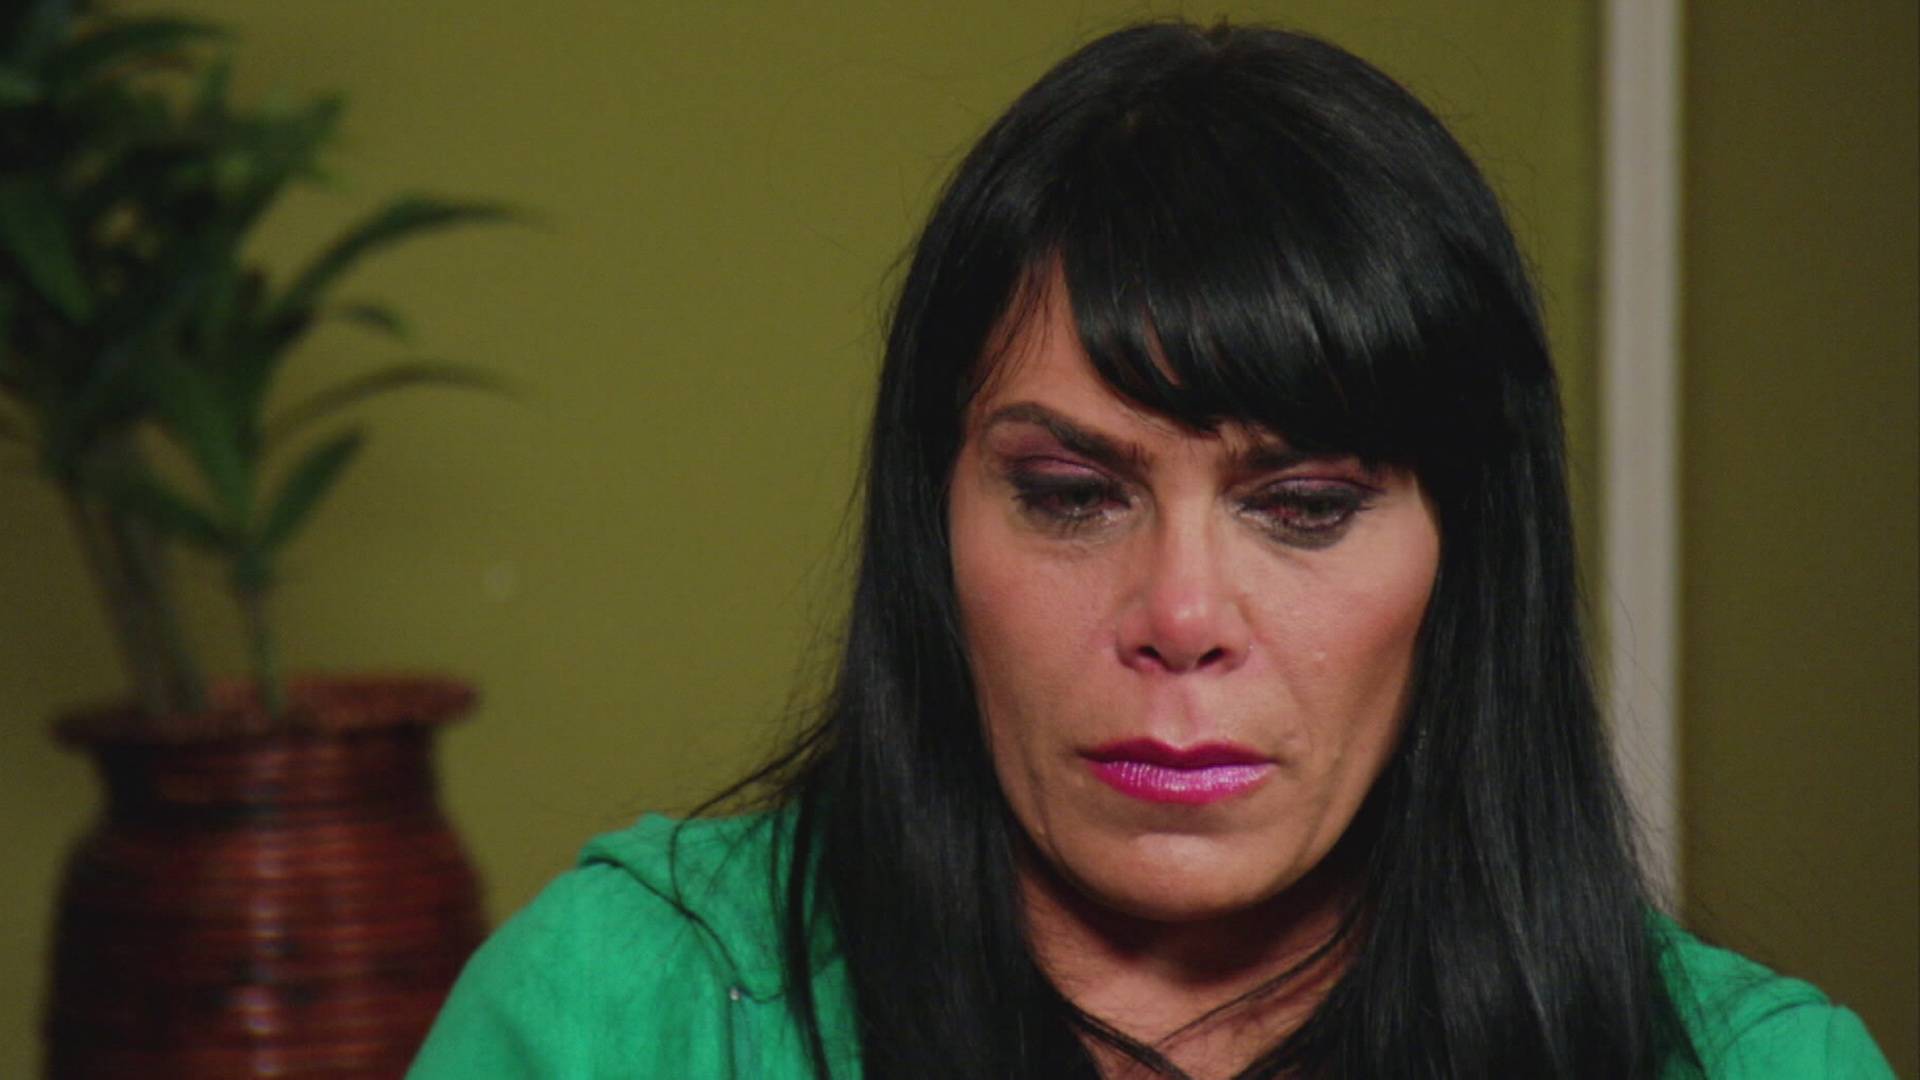 Mob Wives: Threats And Thongs - TV Guide